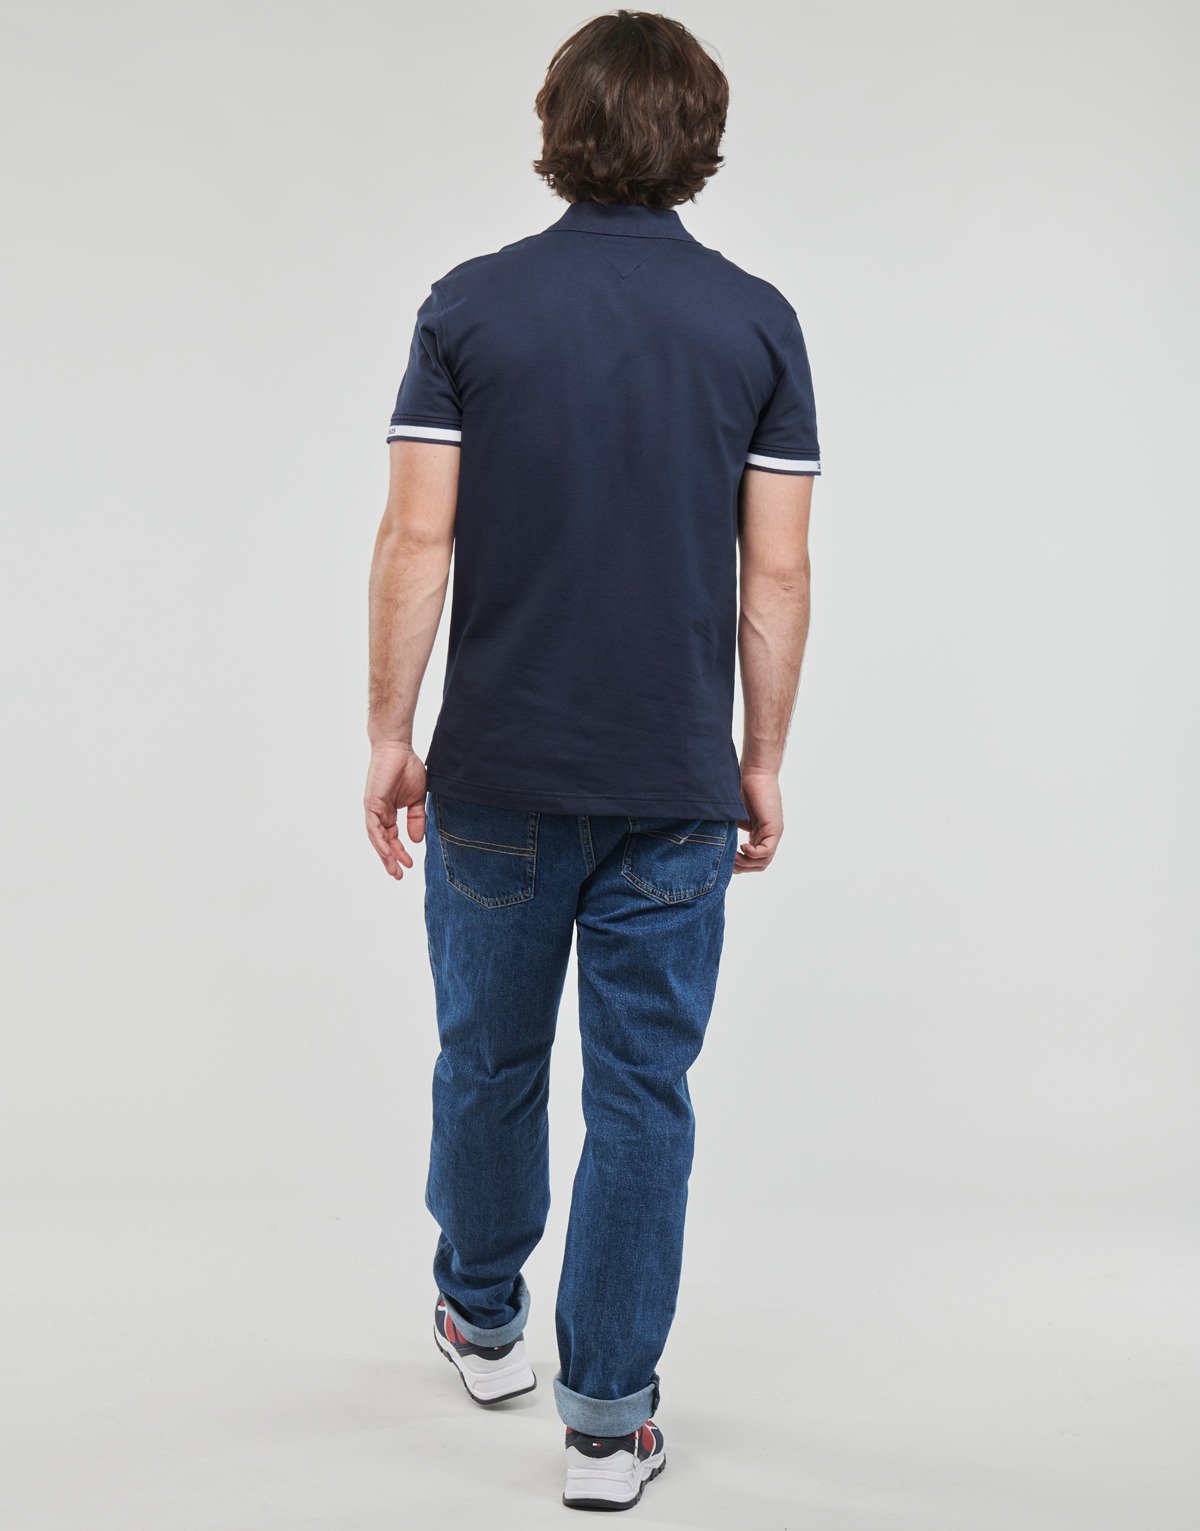 Polo shirt Tommy Jeans TJM CLSC ESSENTIAL POLO